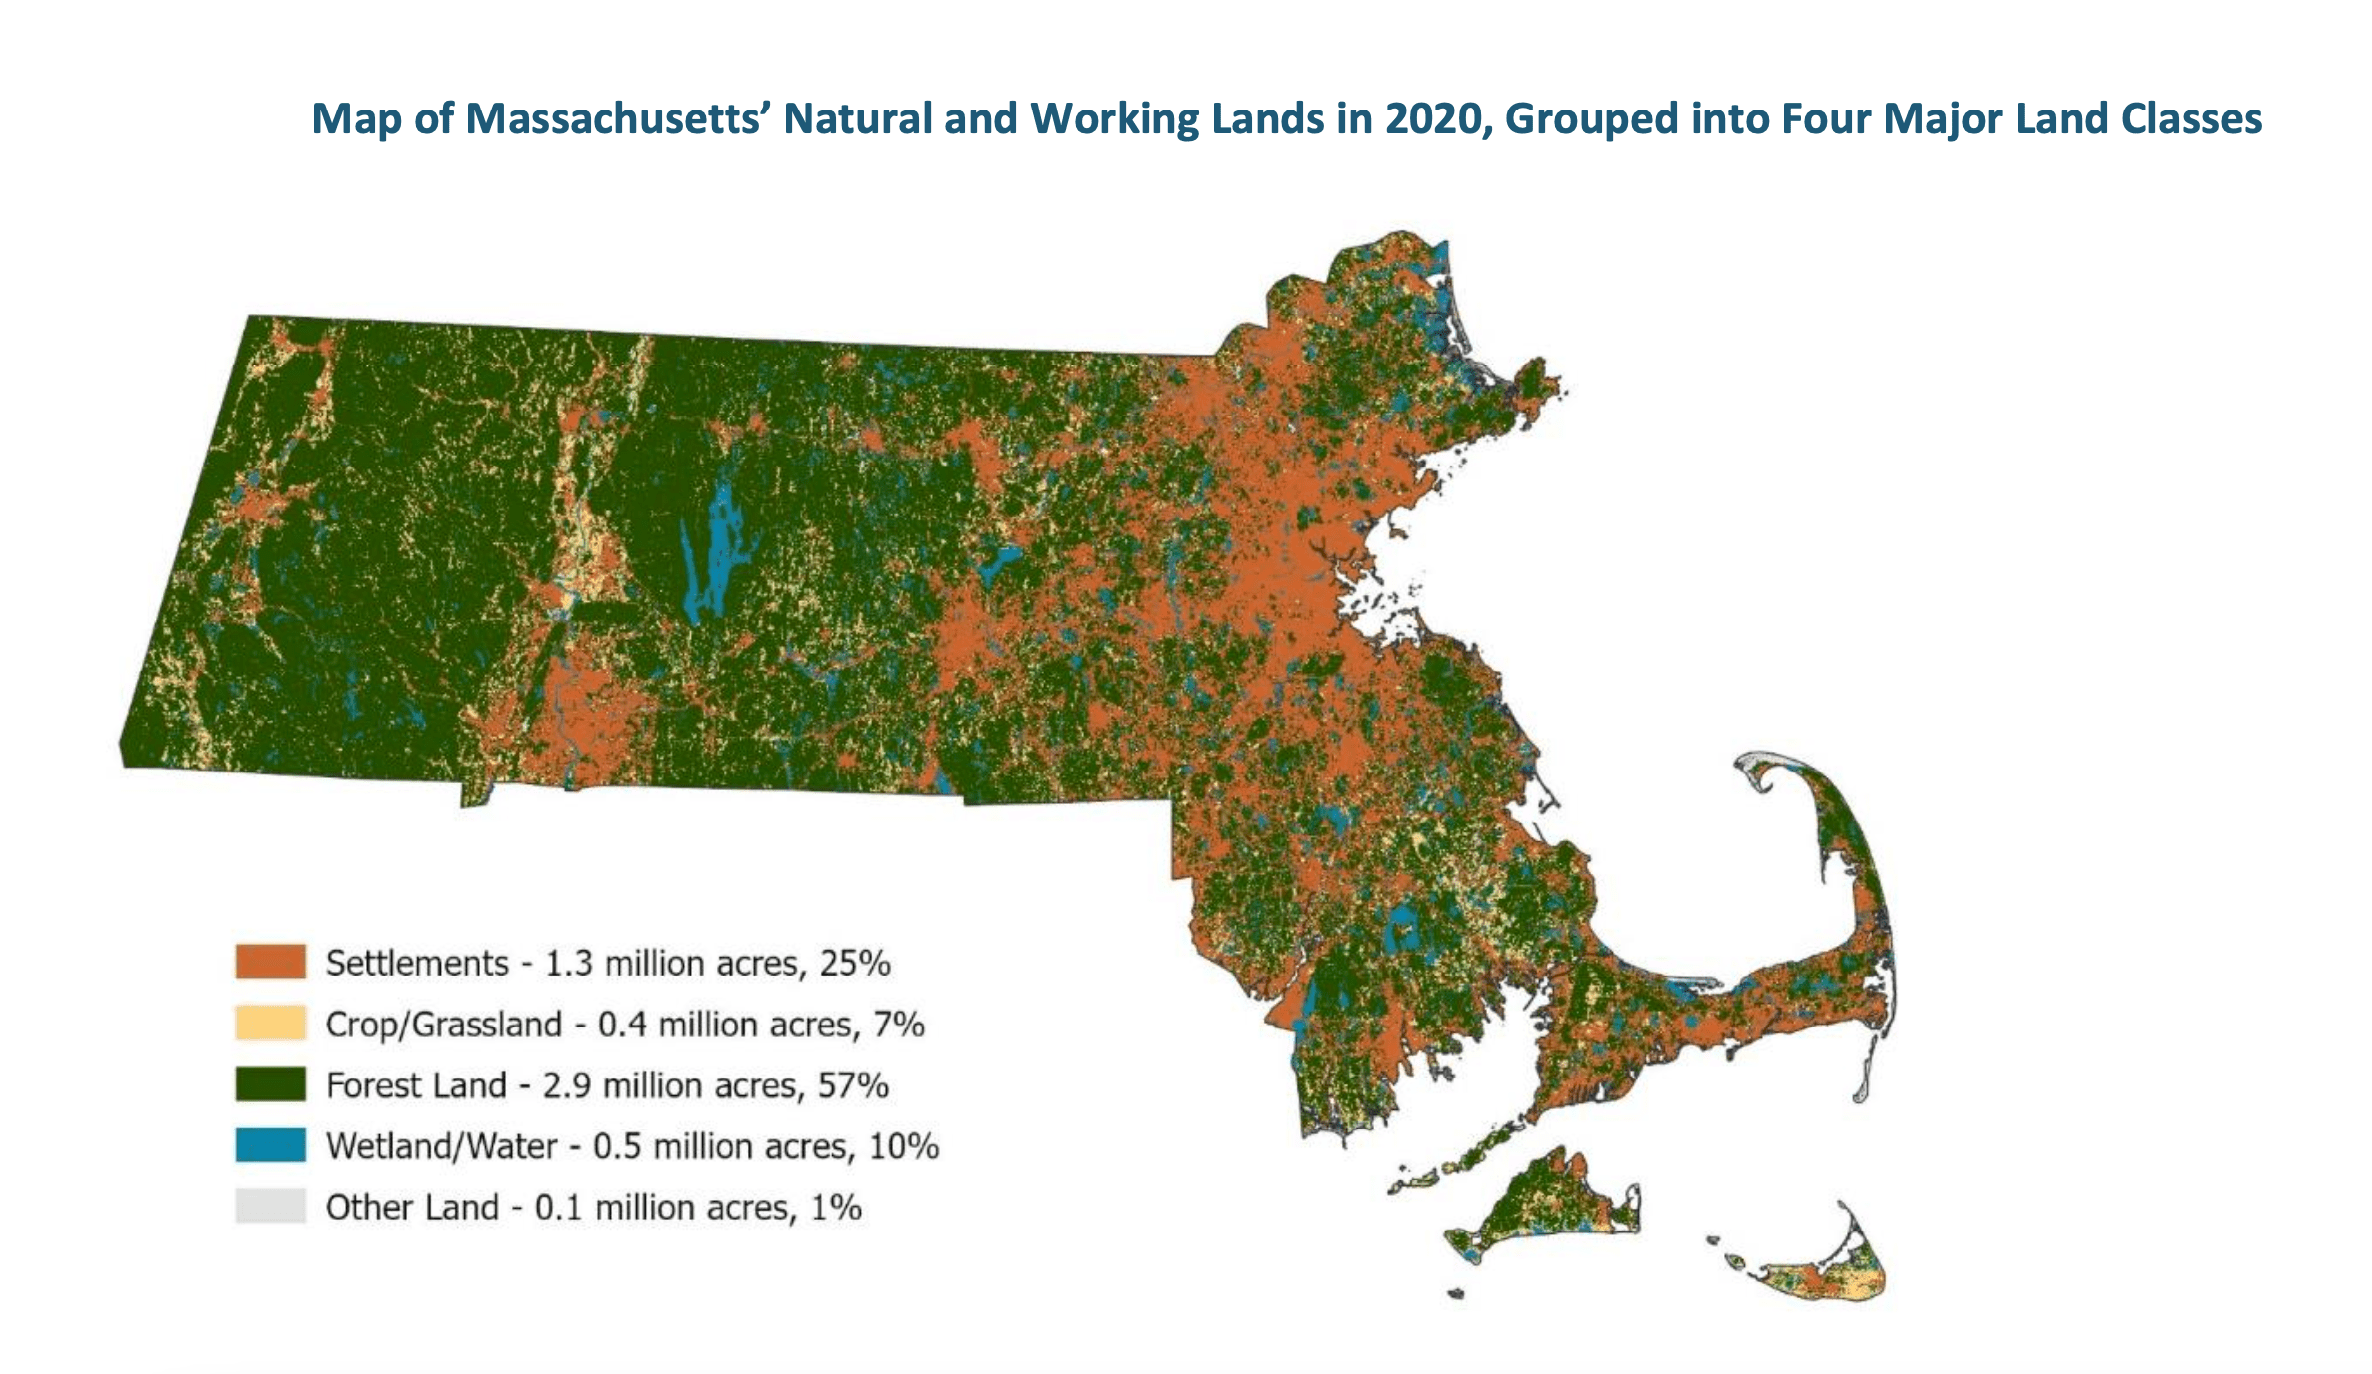 A breakdown of natural and working lands in Massachusetts. (Courtesy of the Office of Energy and Environmental Affairs)